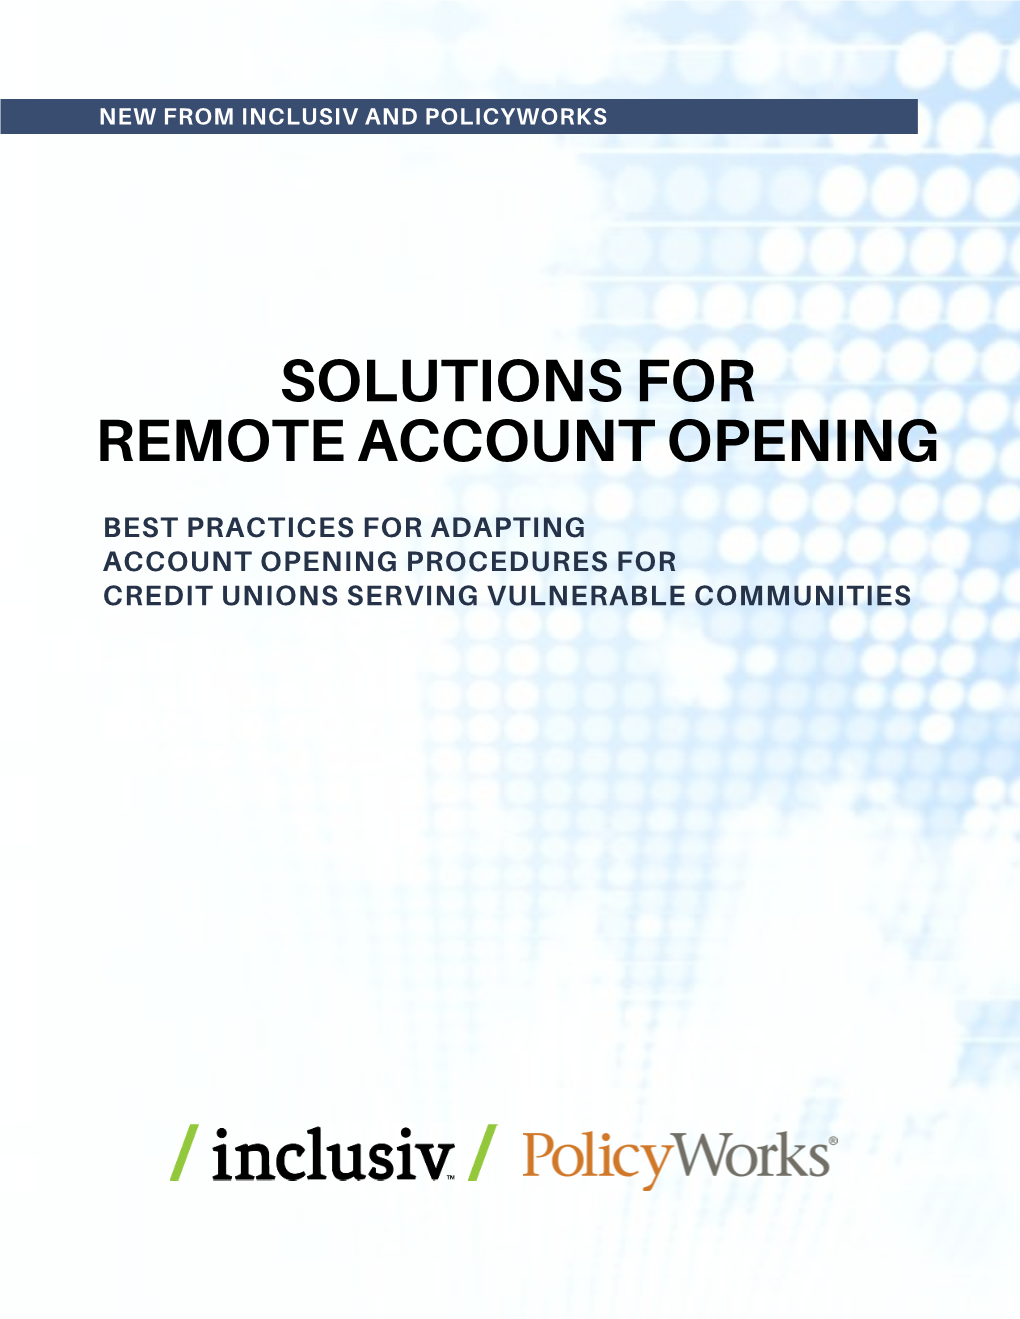 Remote Account Opening